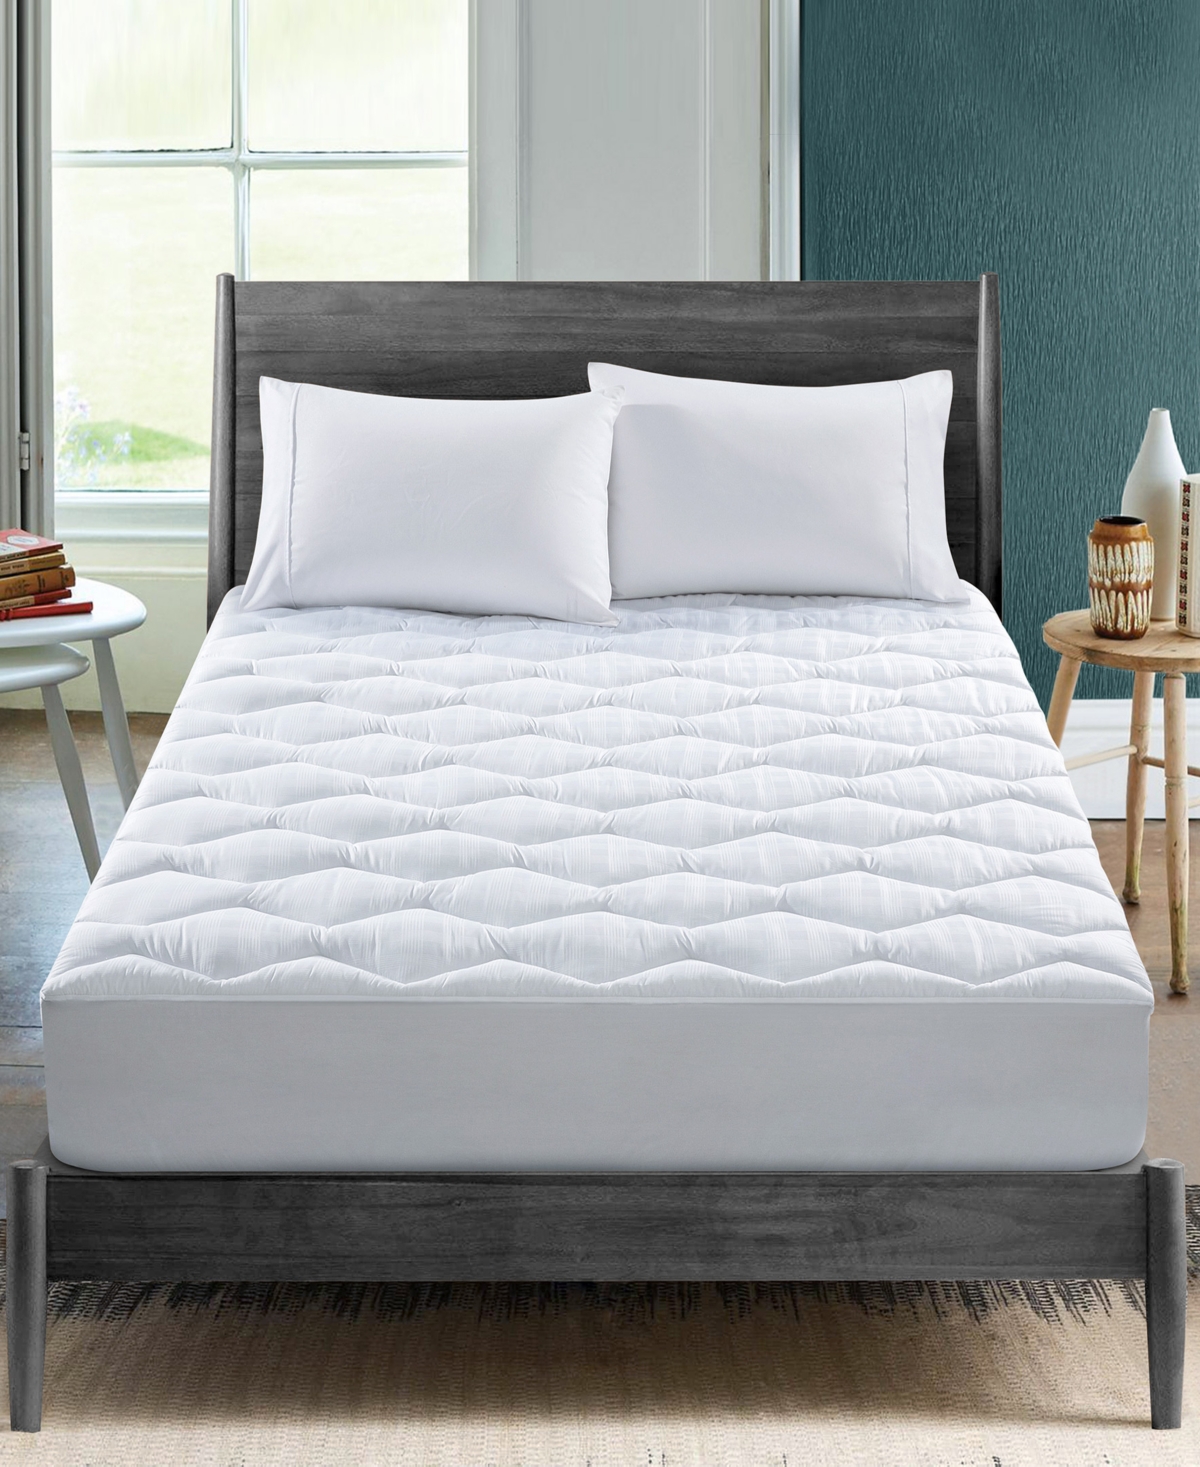 Unikome 500 Thread Count Honeycomb Quilted Fitted Mattress Pad, Full In White